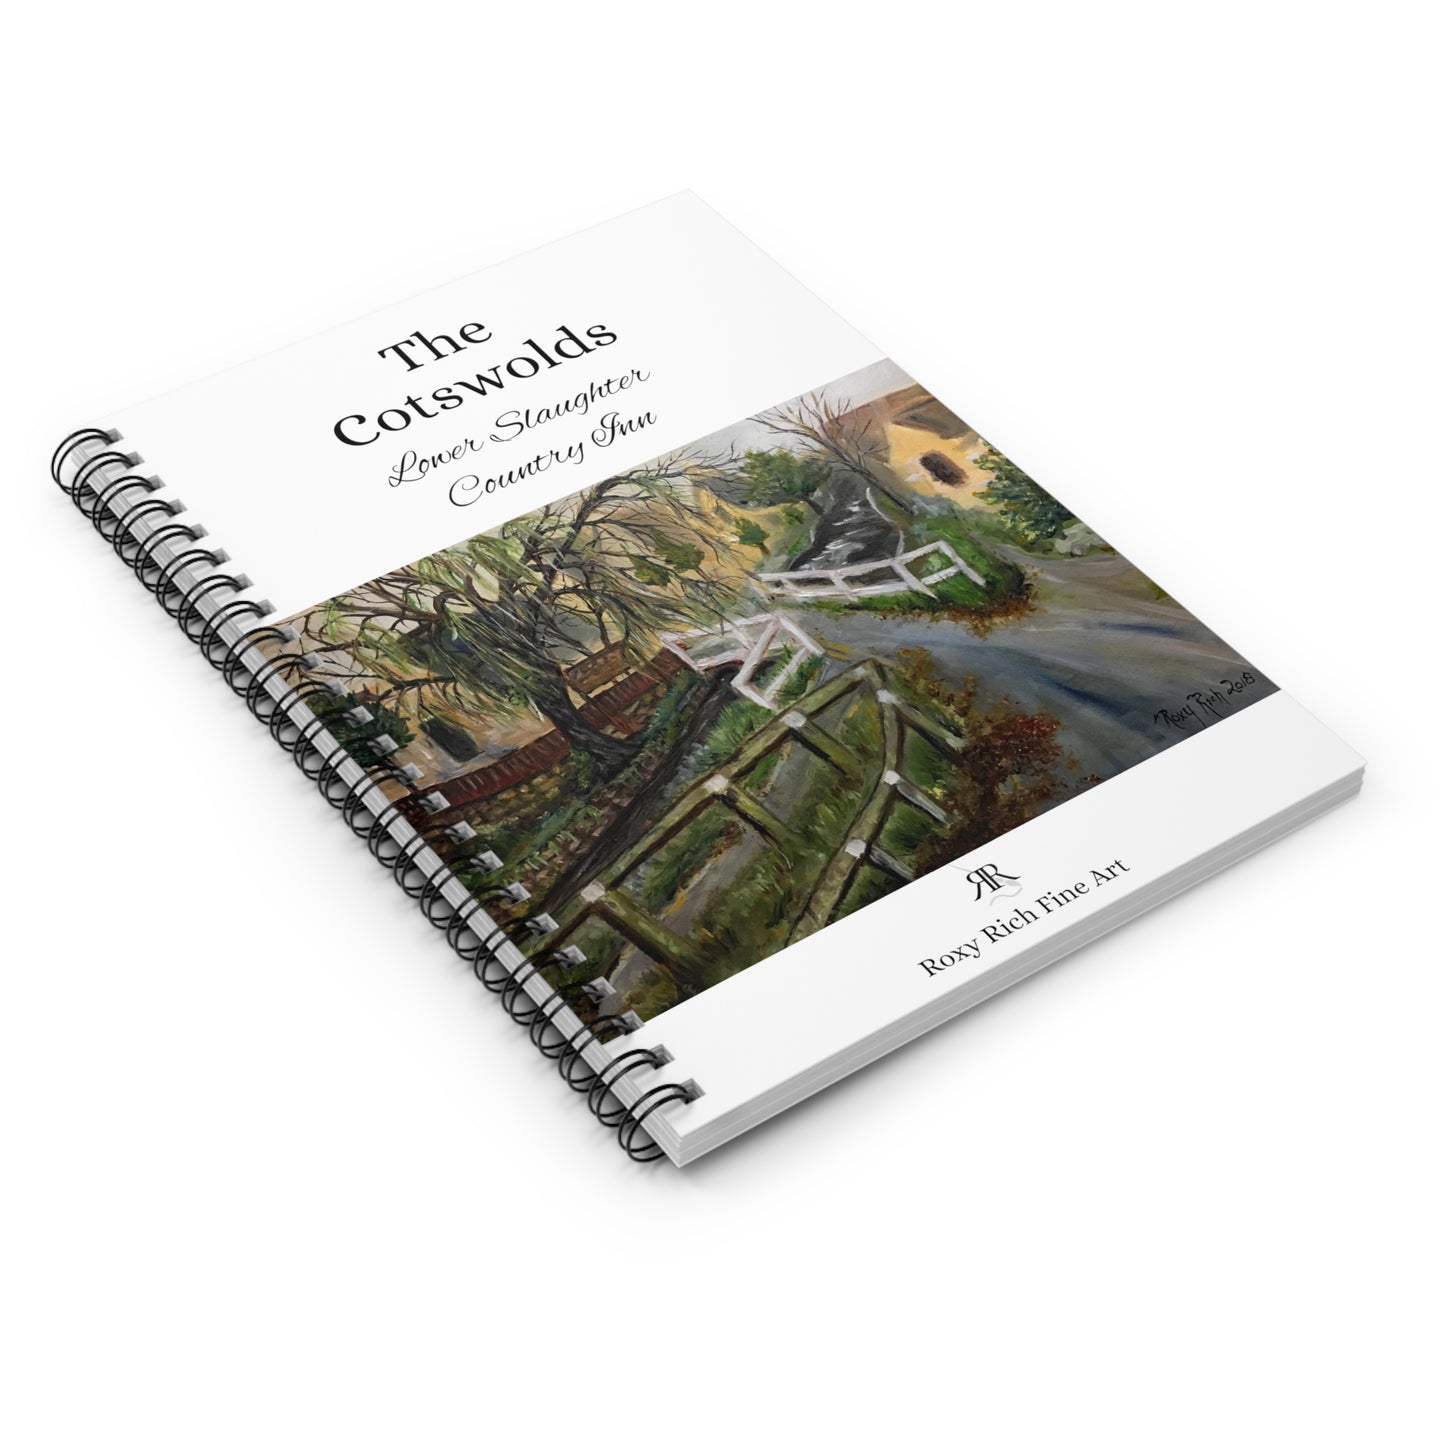 Lower Slaughter Country Inn "The Cotswolds" Spiral Notebook